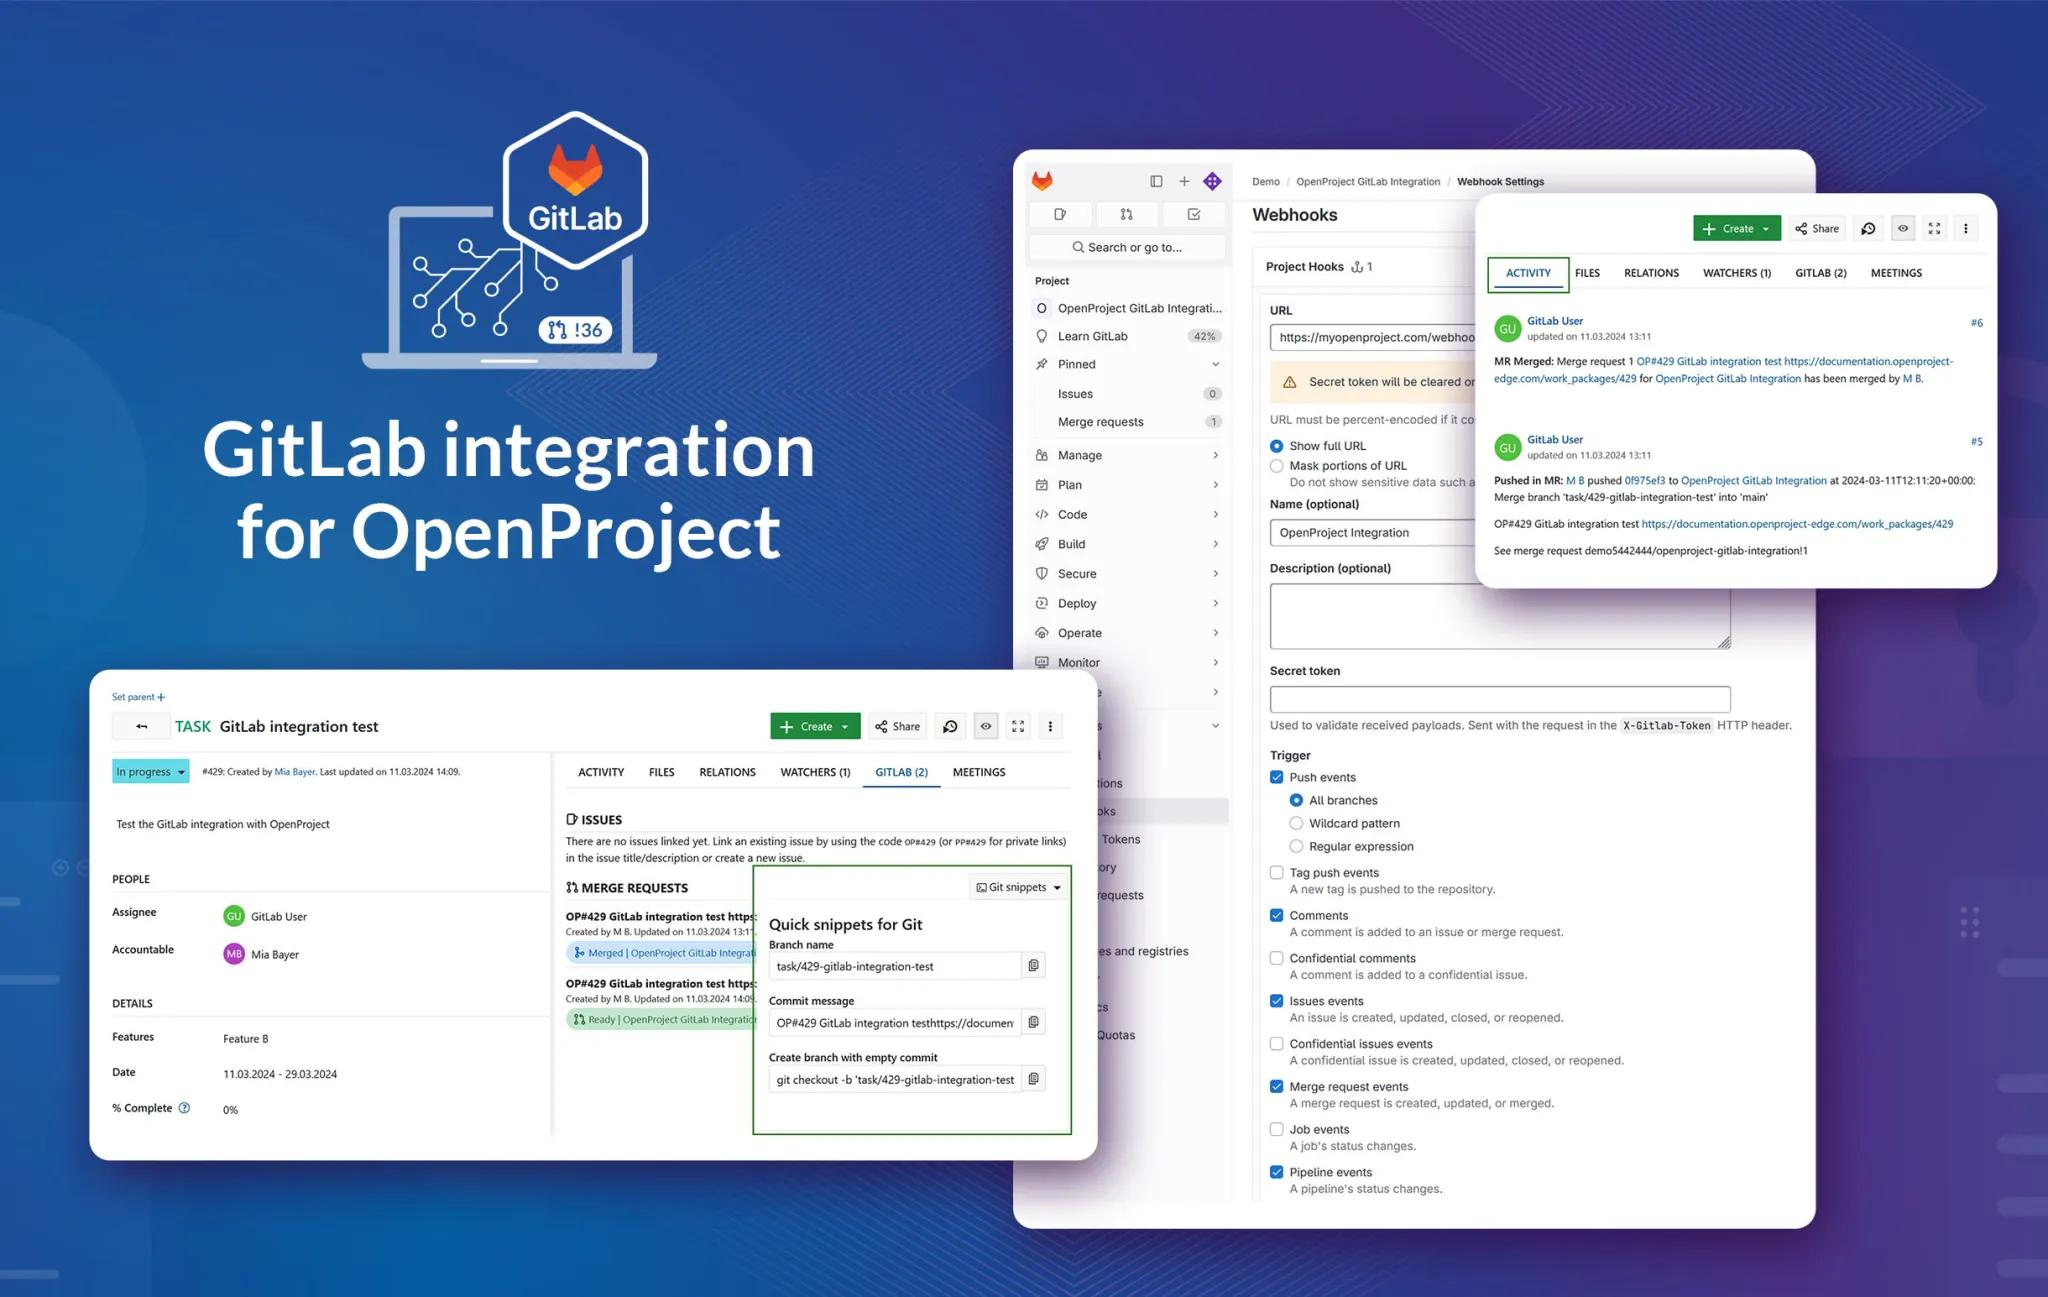 GitLab and OpenProject integration